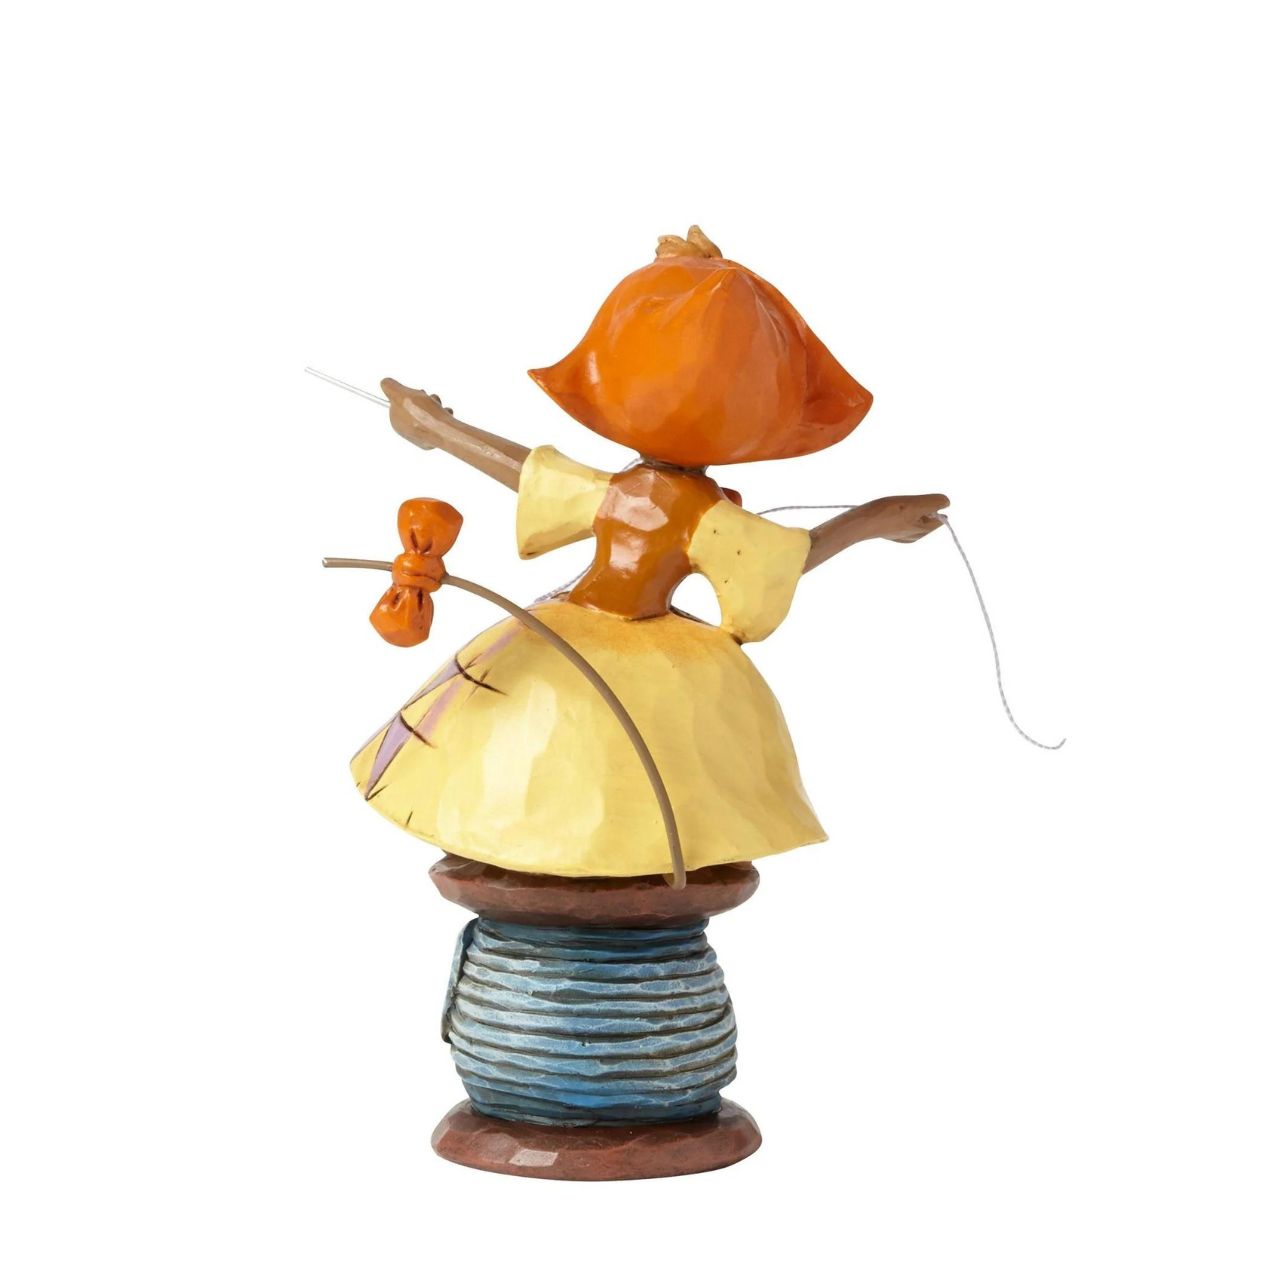 Suzy the seamstress from Disney's Cinderella is happy to lend a helping hand. A great companion piece to the Jaq and Gus clock or as a stand alone figurine. Designed by award winning artist and sculptor, Jim Shore for the Disney Traditions brand.